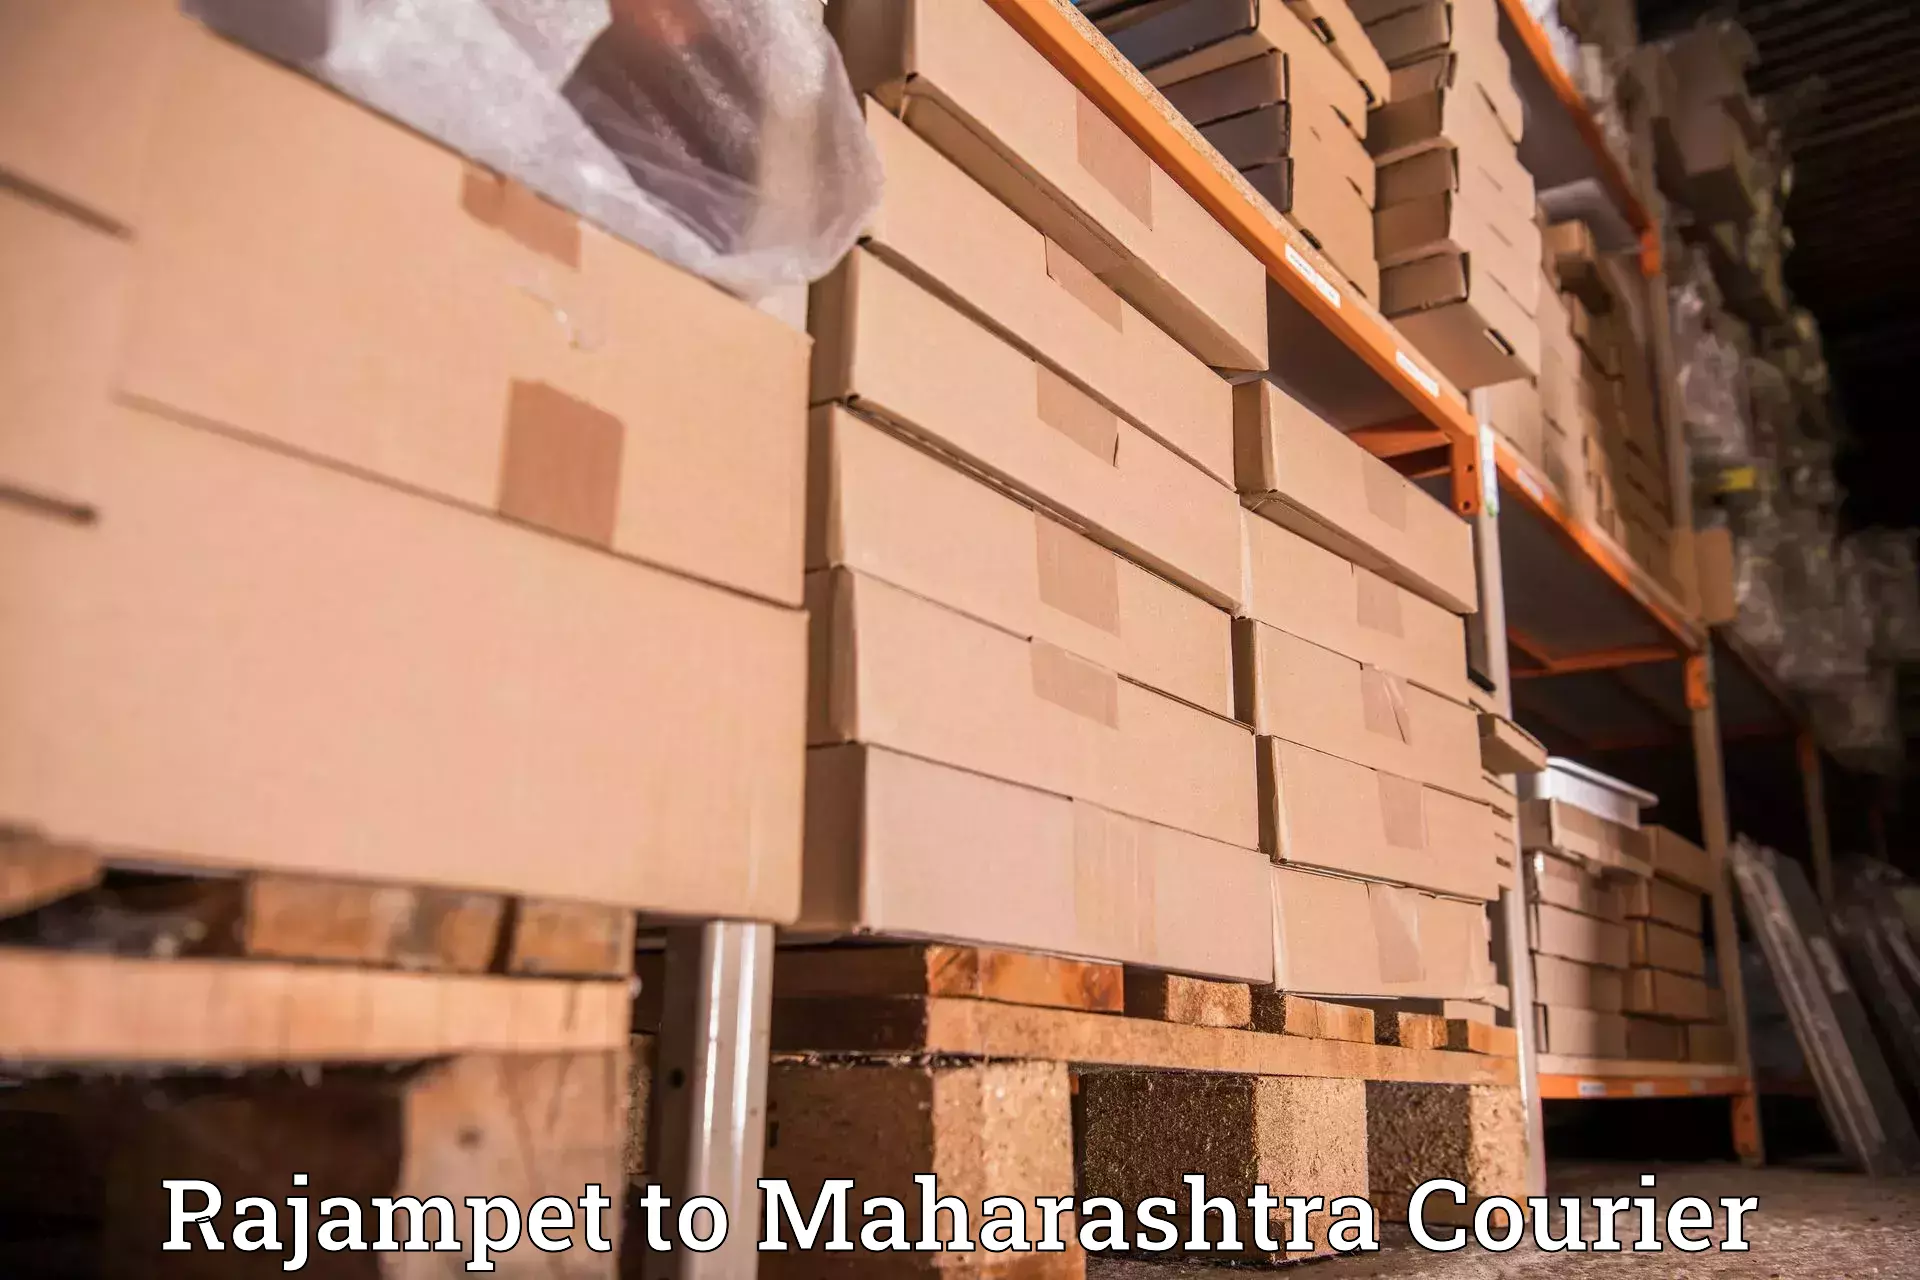 Package delivery network Rajampet to Maharashtra